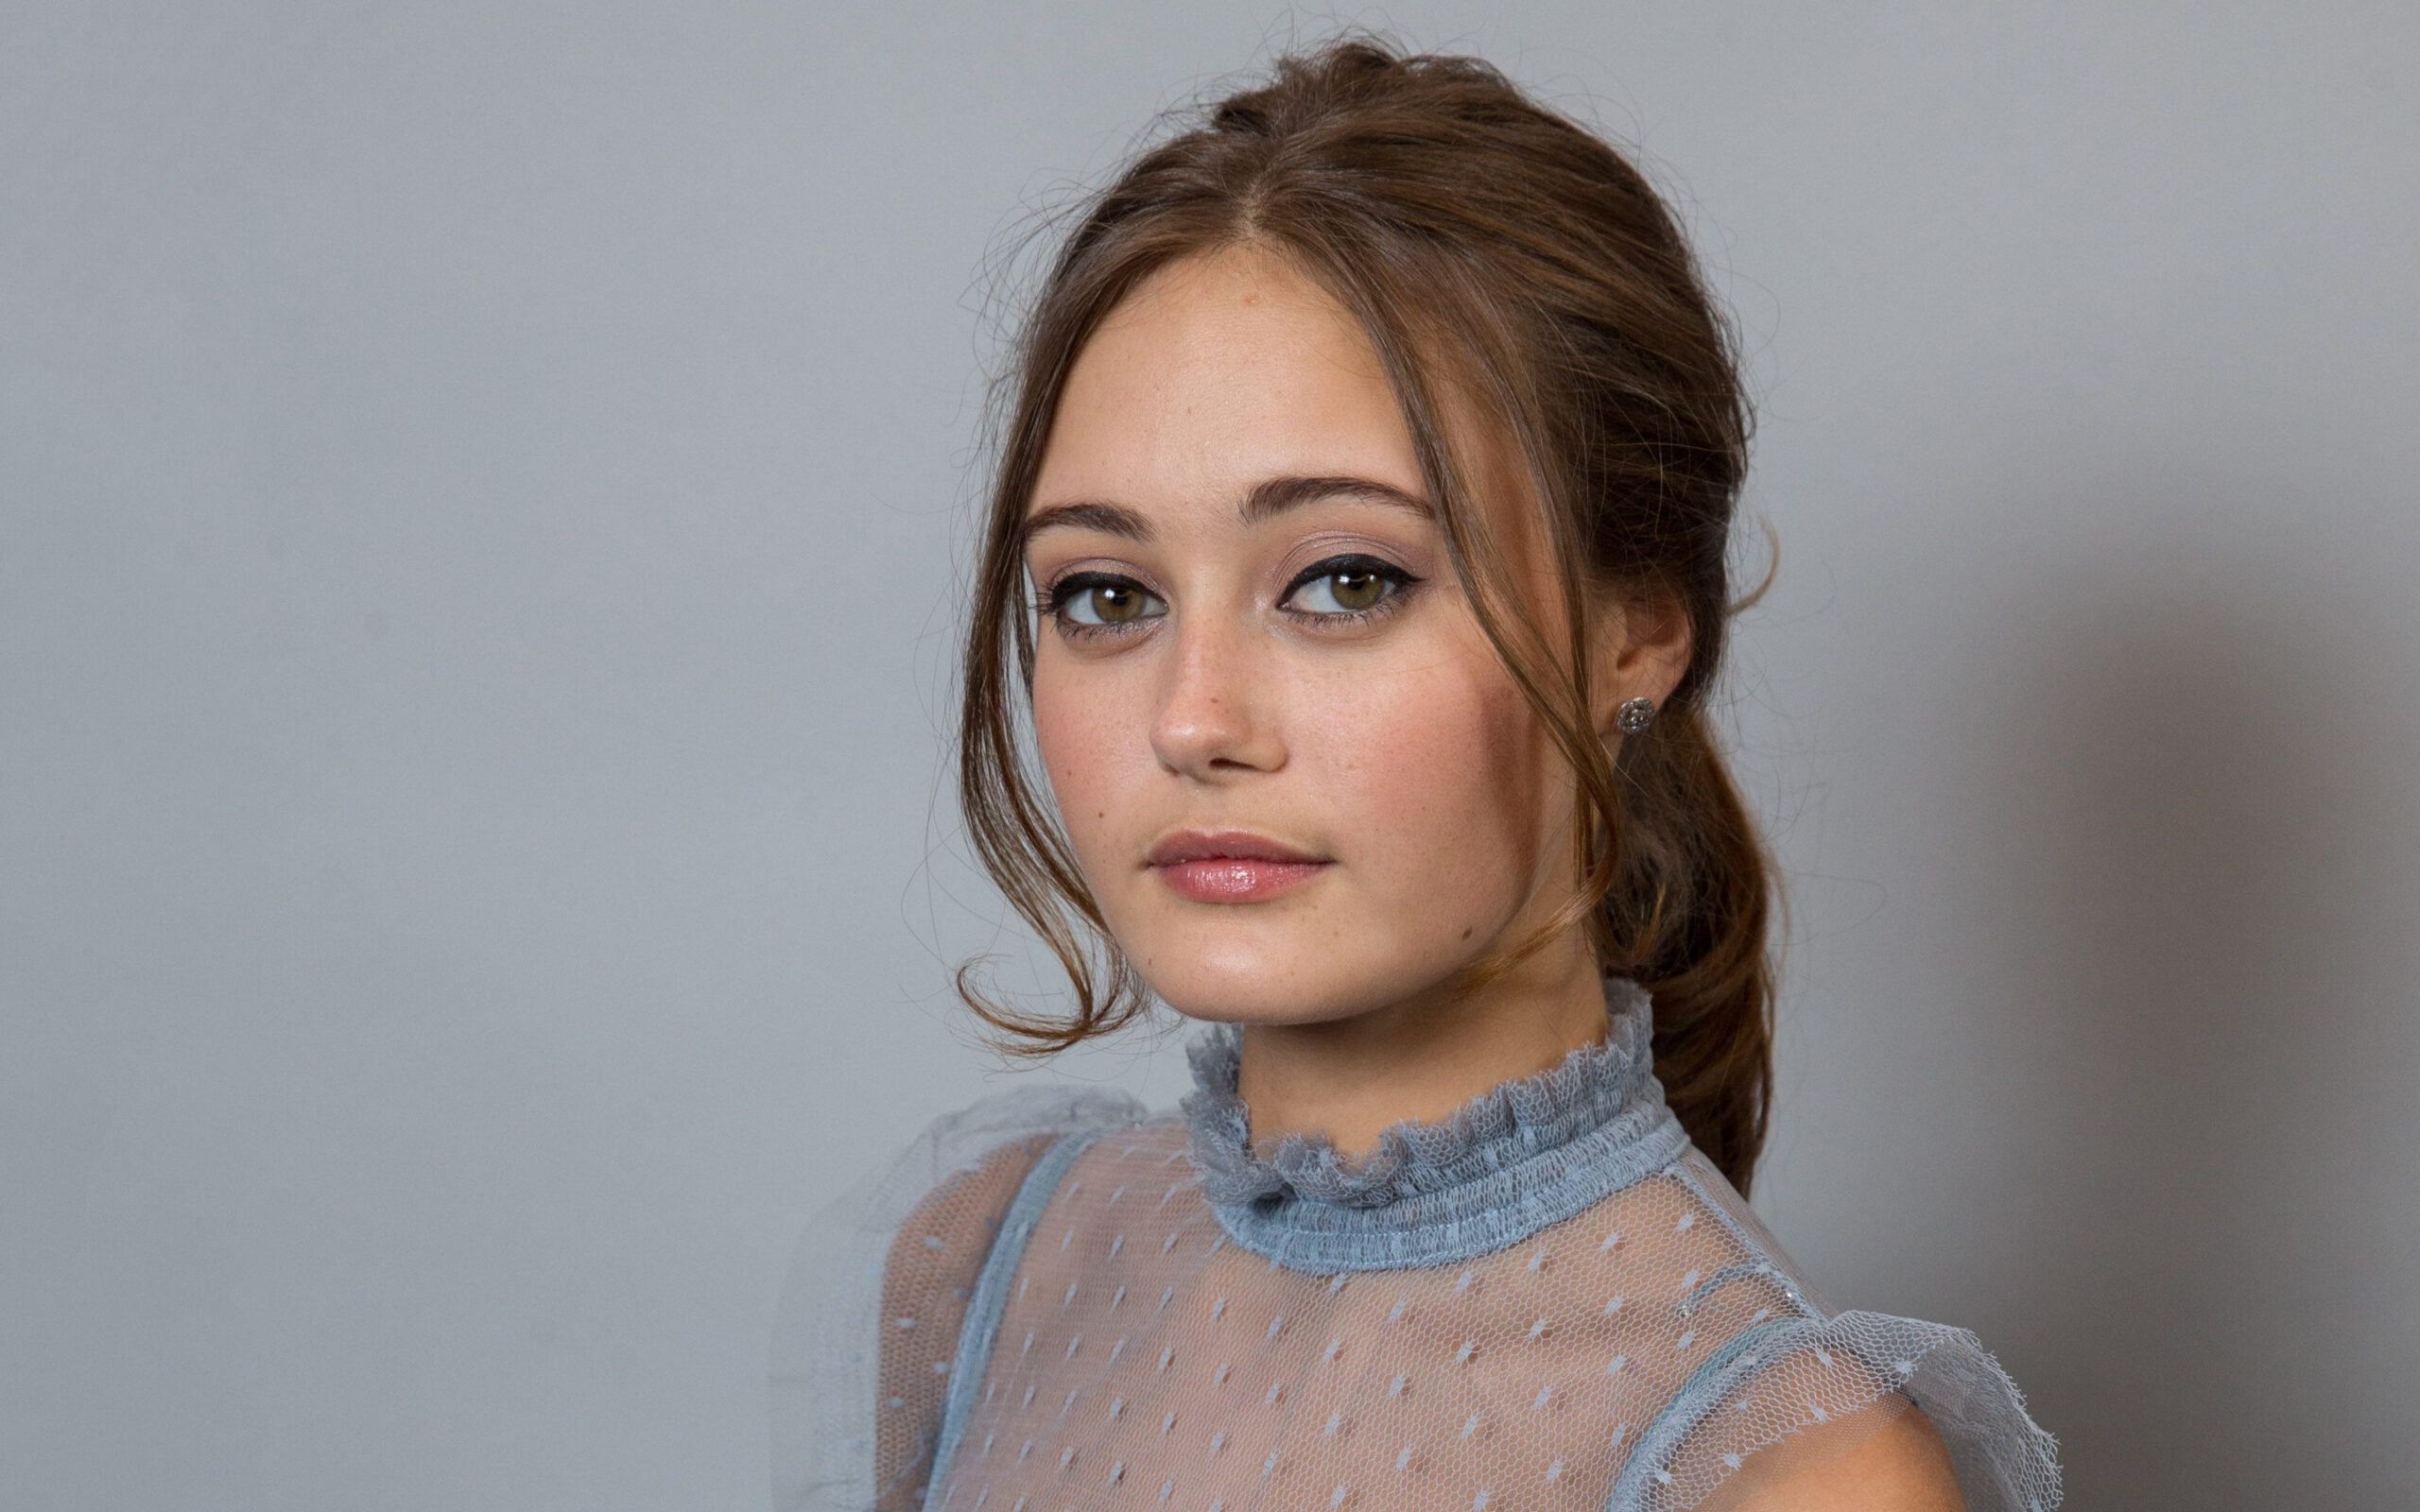 Ella Purnell Tackles Wild Squirrels in New Comedy-Horror 'The Scurry' After 'Fallout' Success